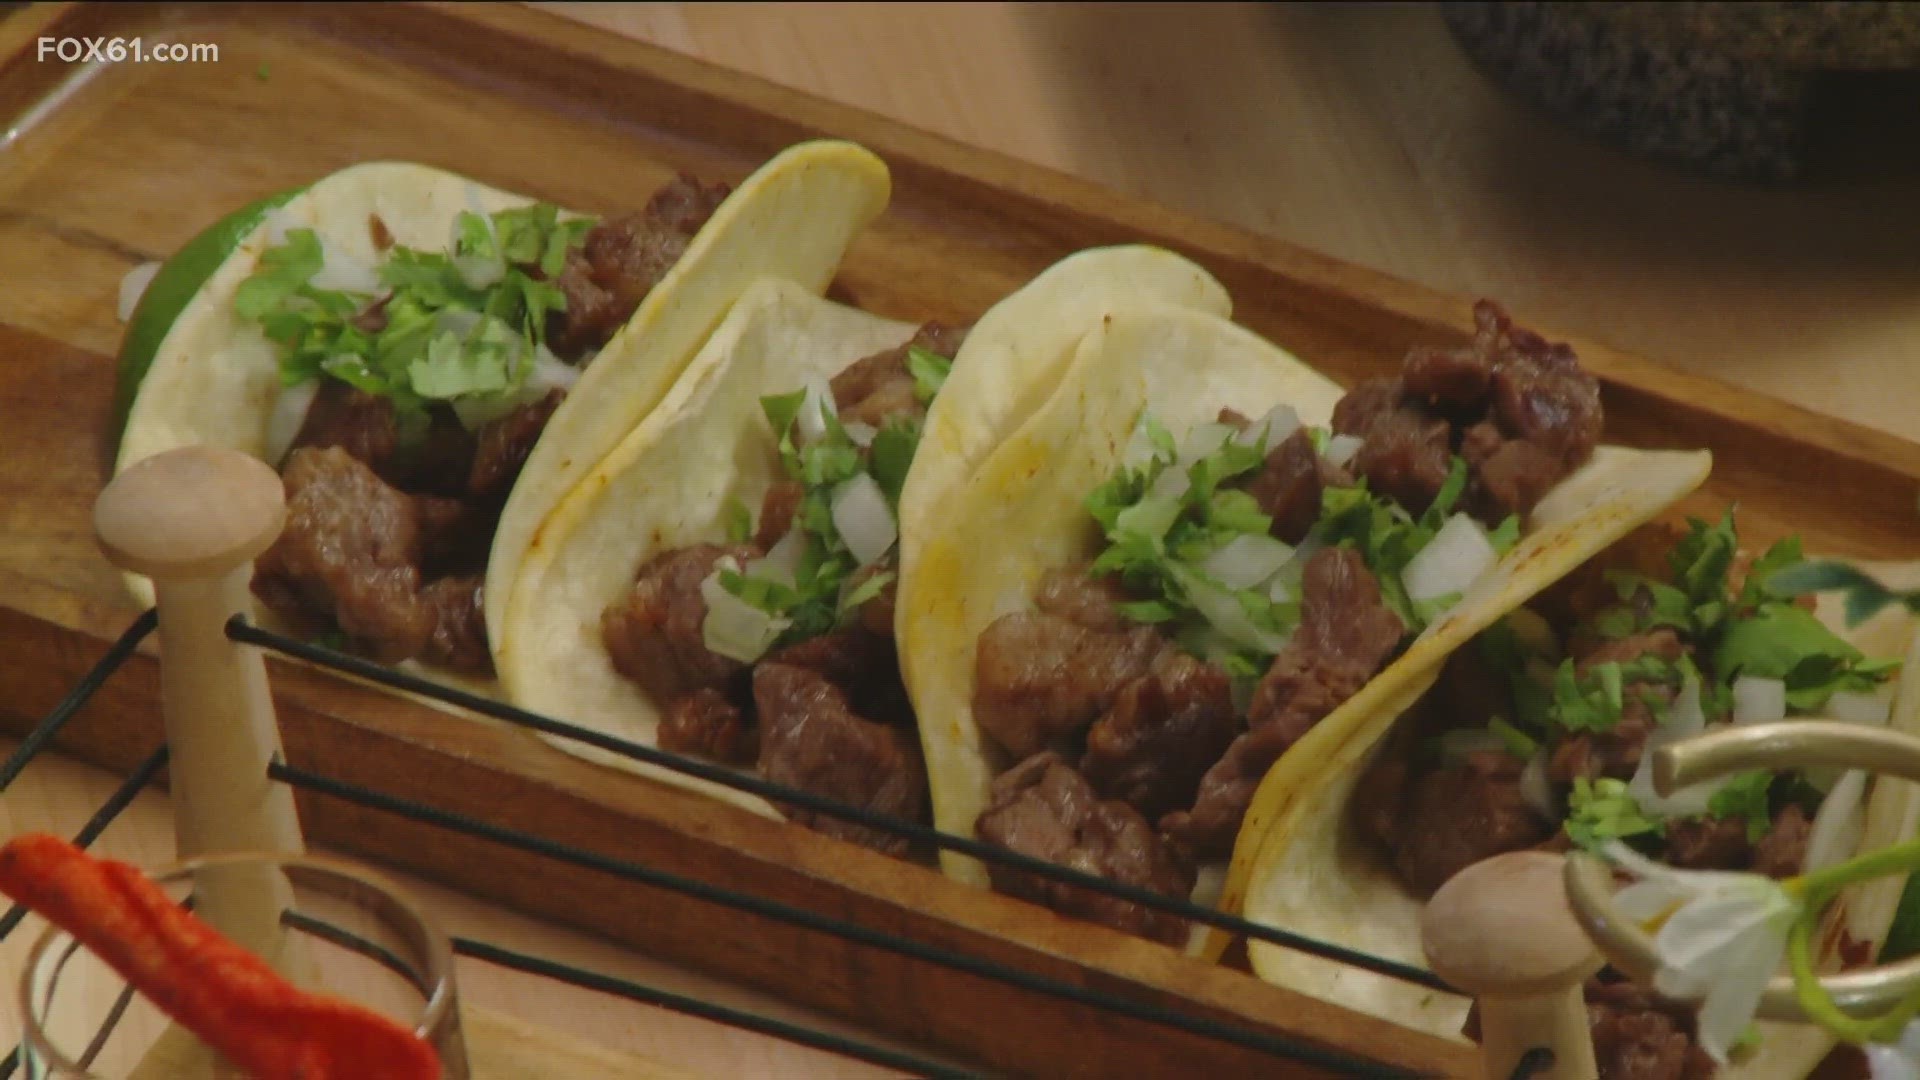 Looking for recipes for your Cinco de Mayo celebrations this week? Look no further than this El Santo's birria taco recipe!